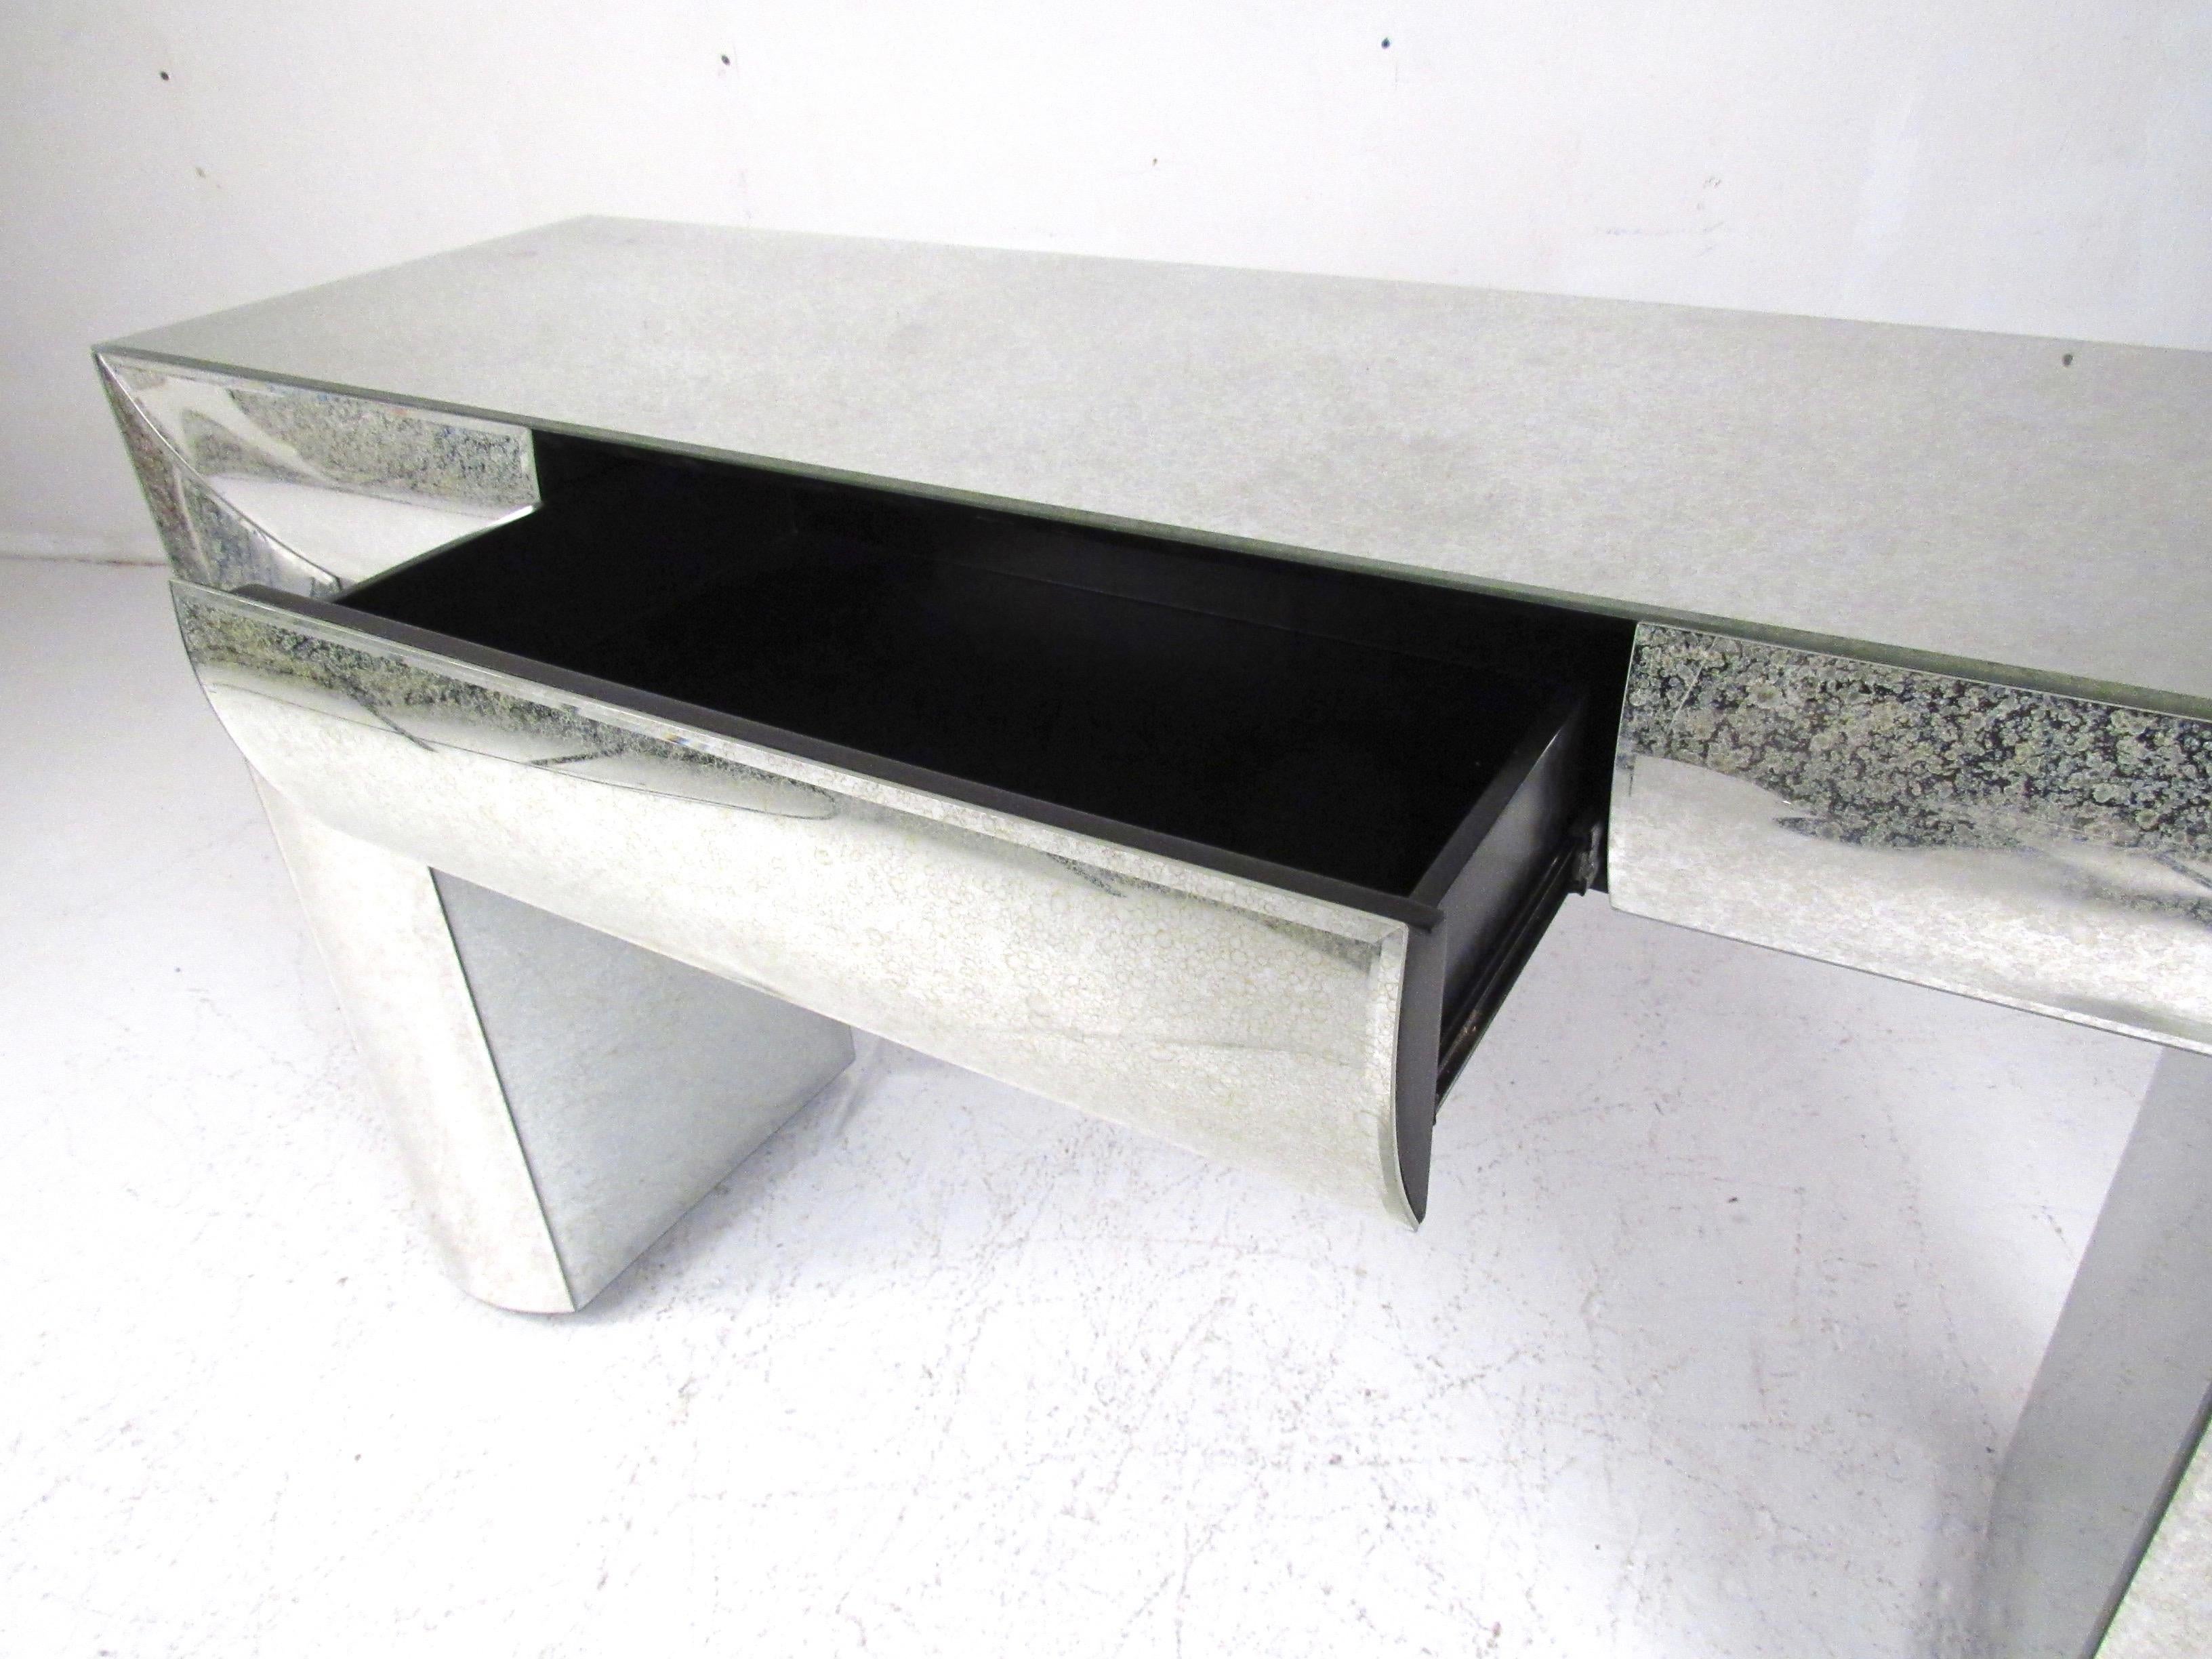 This striking decorator modern console table features antiqued mirror finish with unique rounded sides. Two top drawers allow for added storage should this table be used as a vanity. Impressive Hollywood Regency appeal makes for the perfect addition